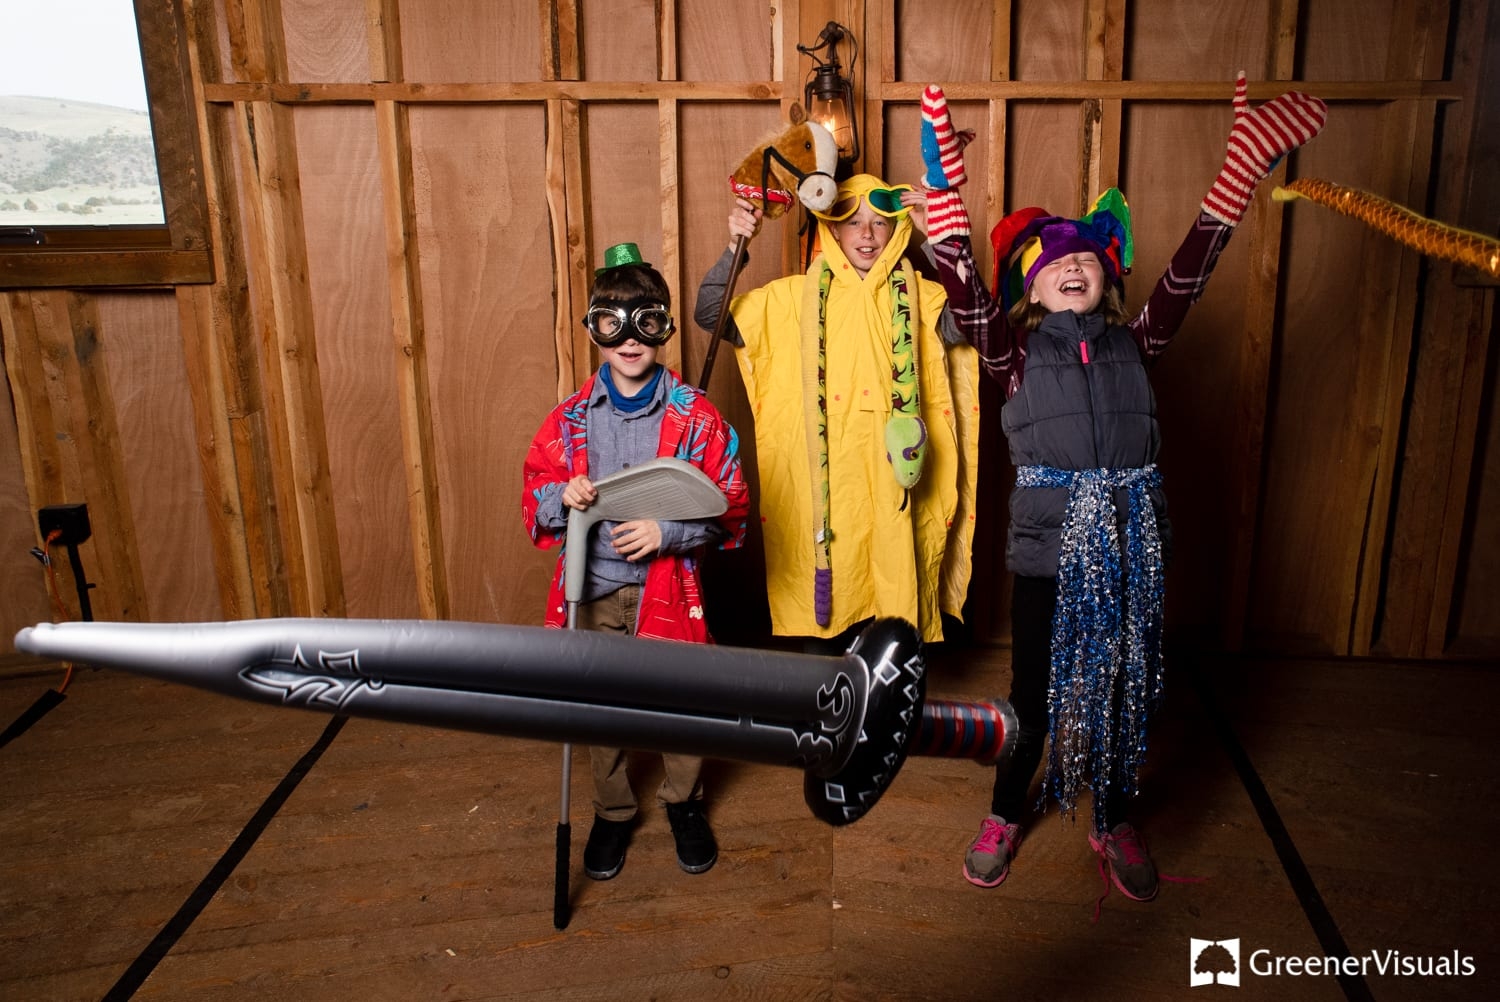 sword-play-photo-booth-headwaters-ranch